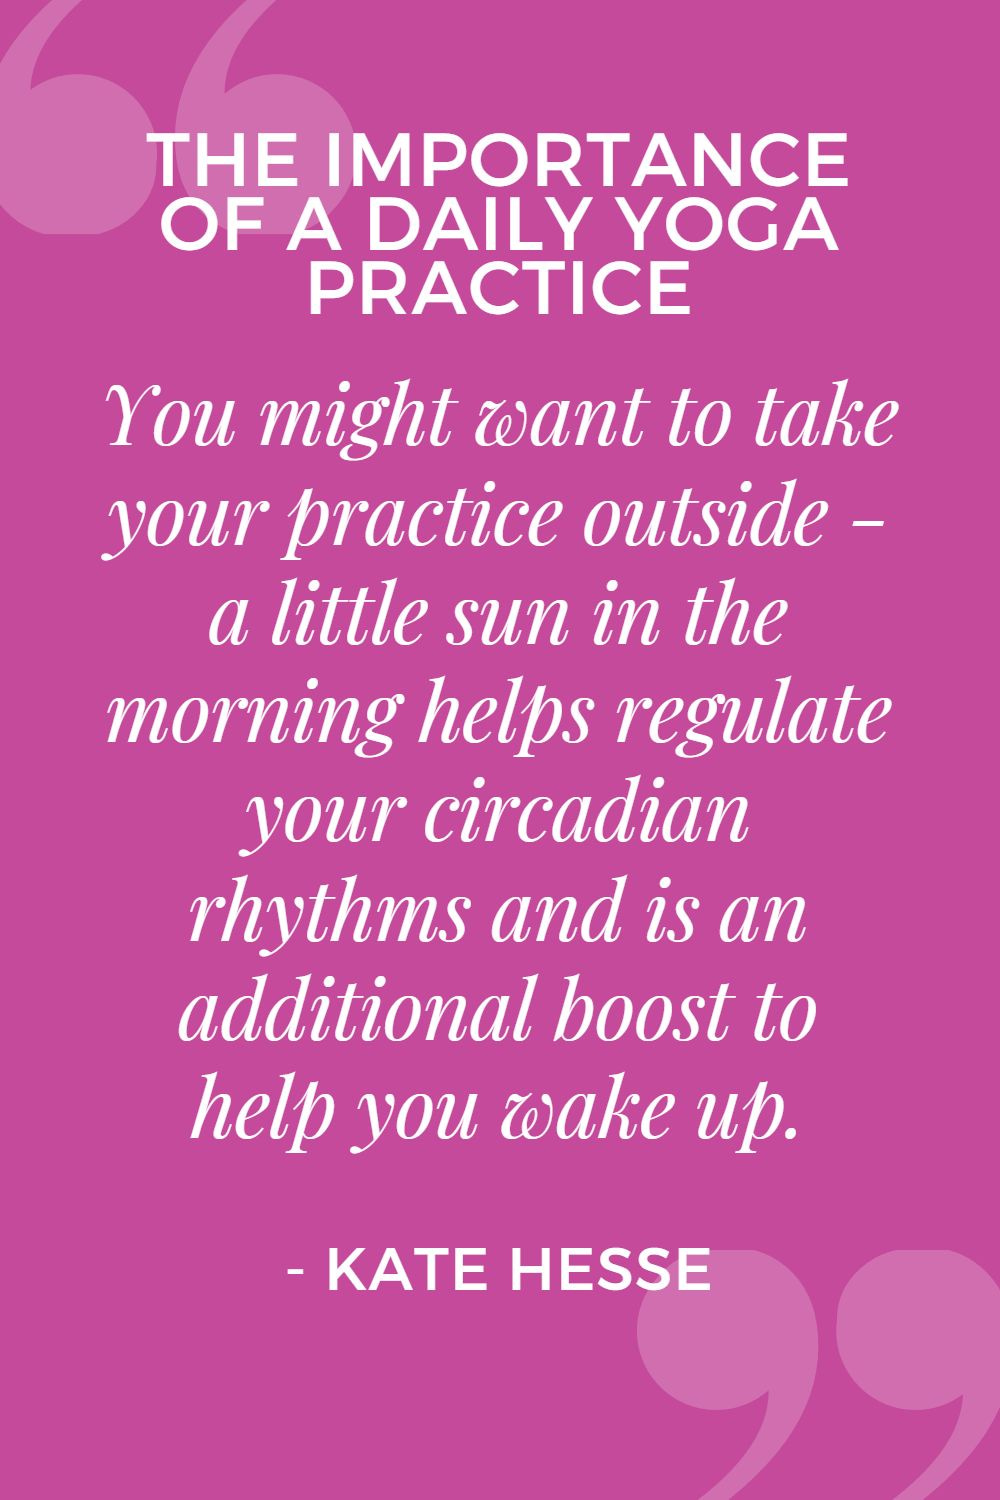 You might want to take your practice outside - a little sun in the morning helps regulate your circadian rhythms and is an additional boost to help you wake up.